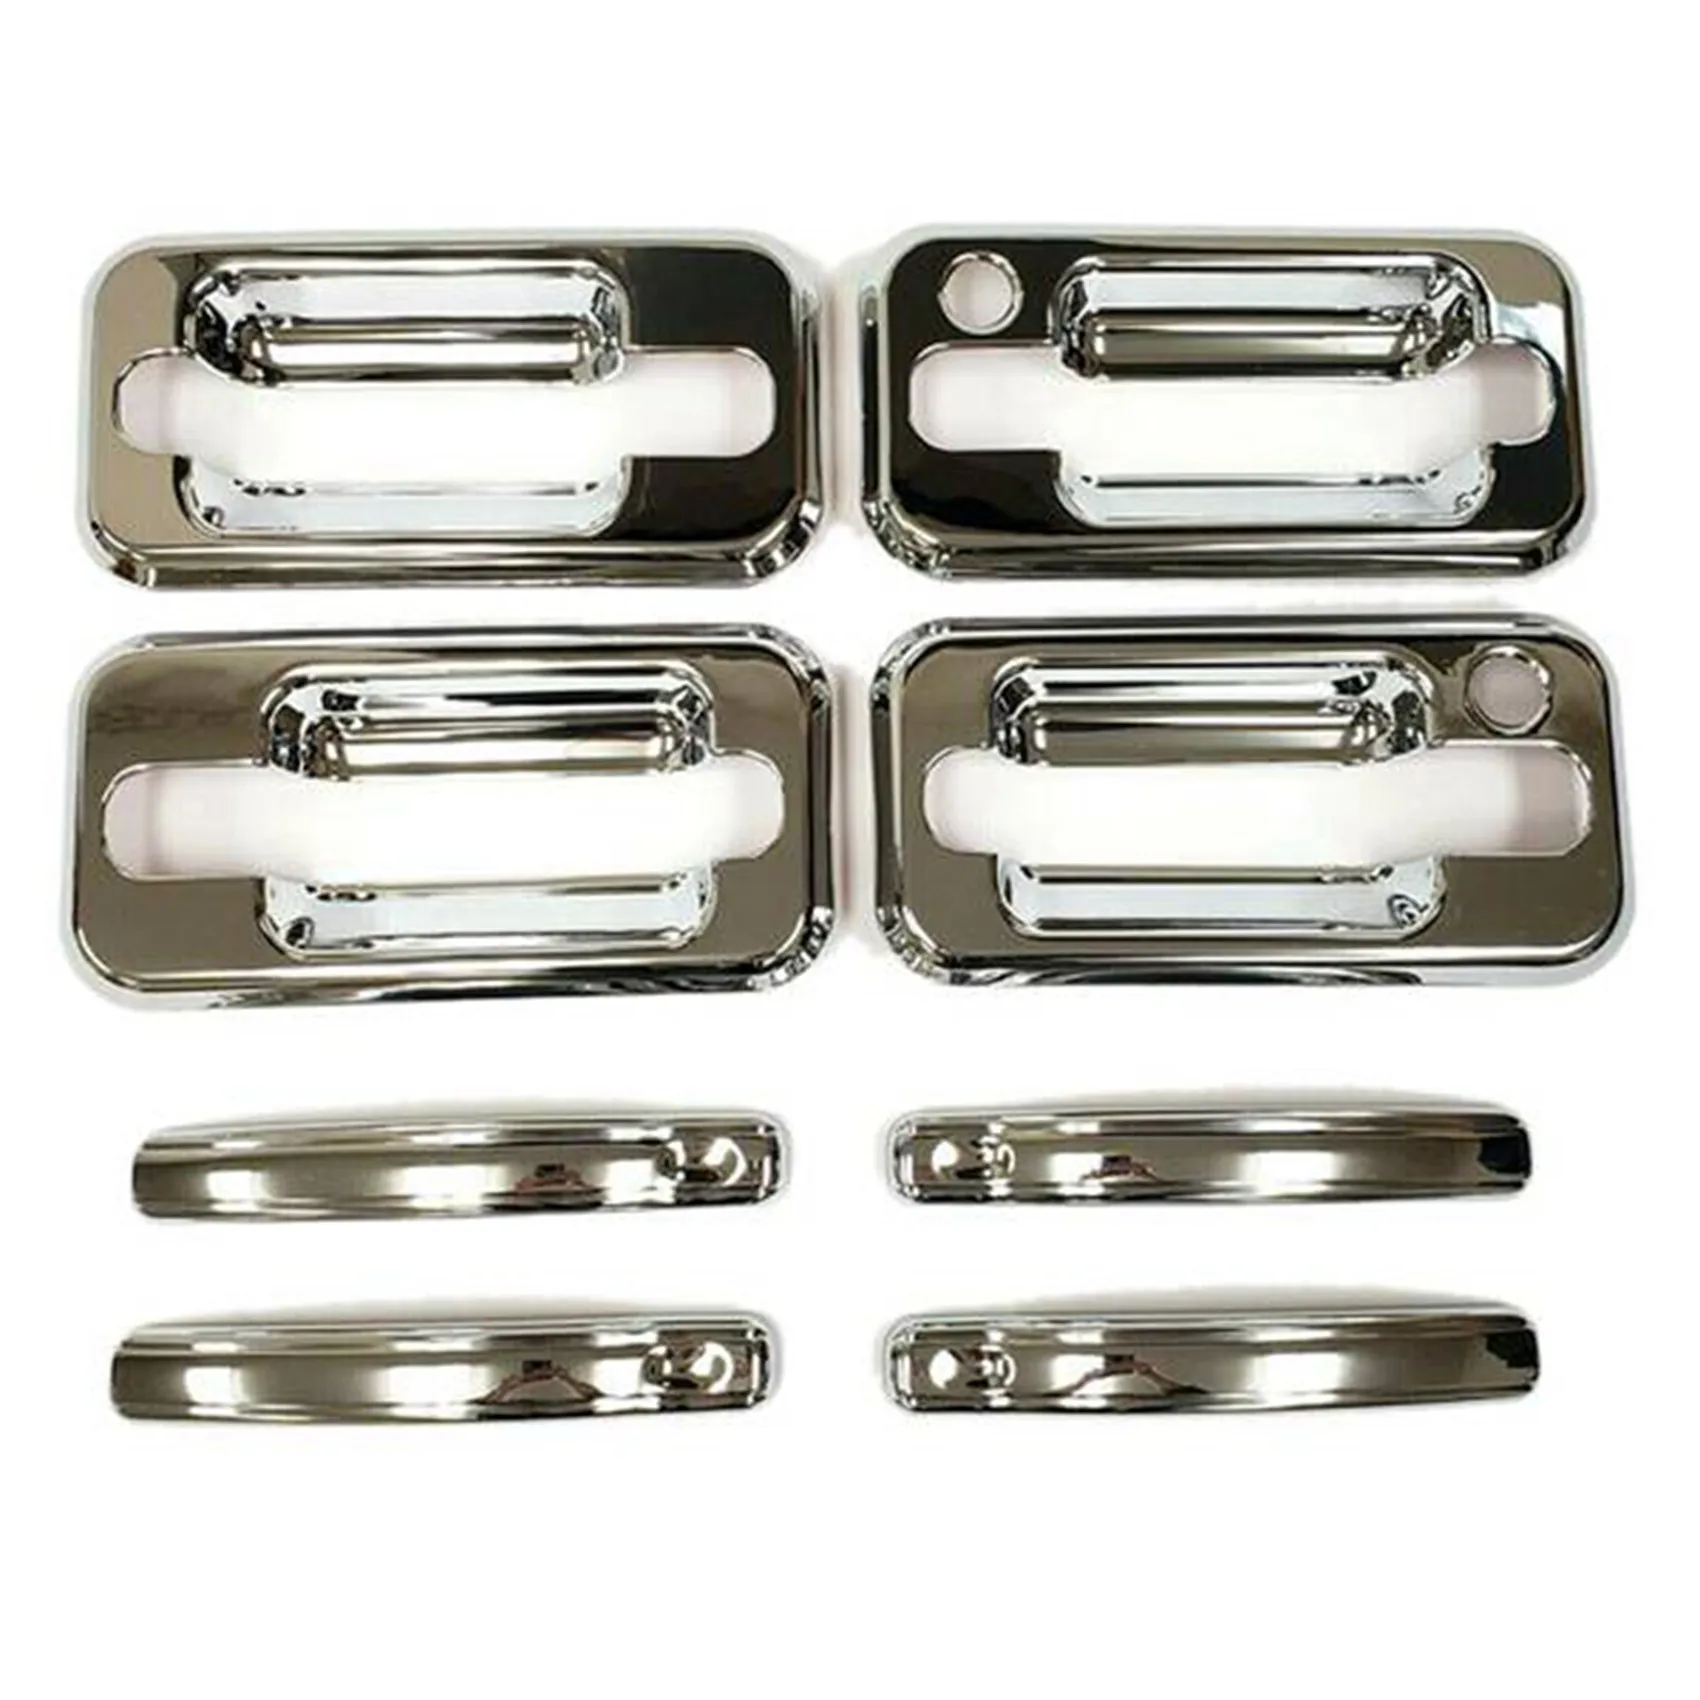 

8PC/Set Front+Rear Door Handle Cover for Hummer H2 SUV SUT 2003-2009 Chrome Without Passenger Key Hole Exterior Covers